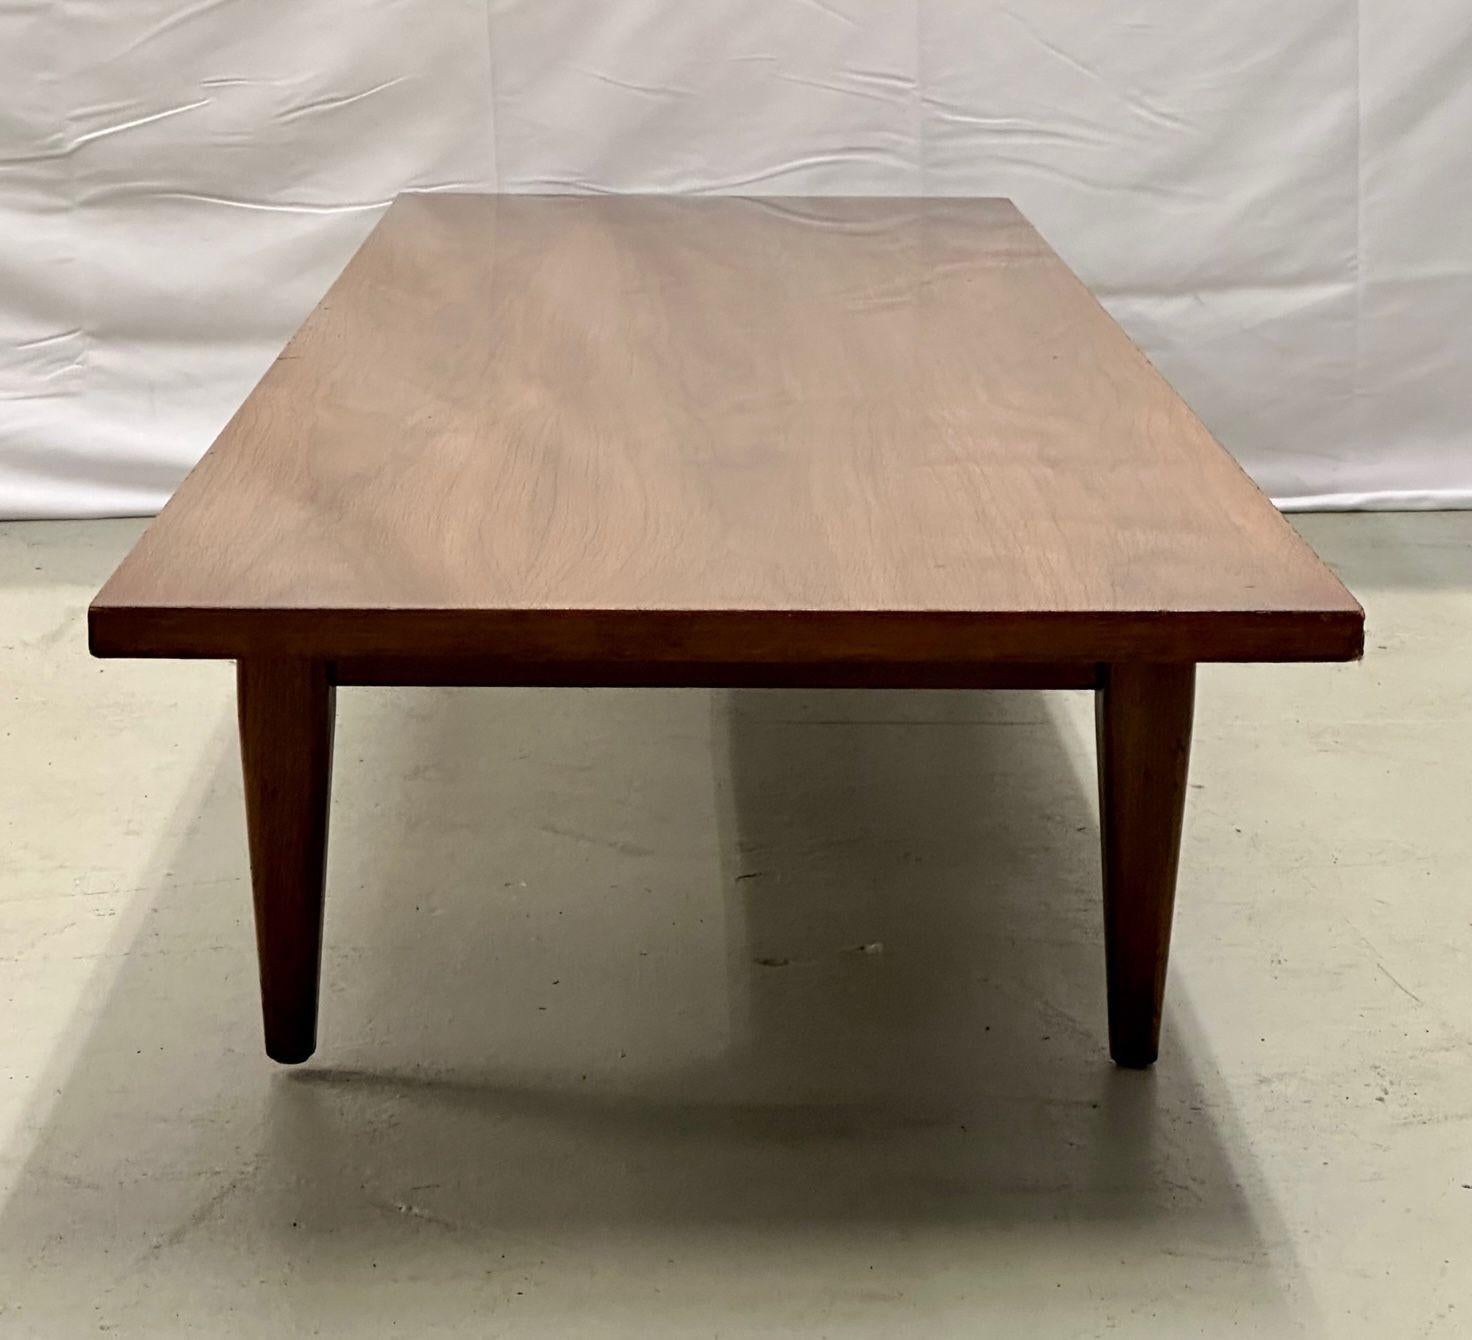 Danish Mid-Century Modern Cocktail or Coffee Table, 1950s, Solid Teak For Sale 7